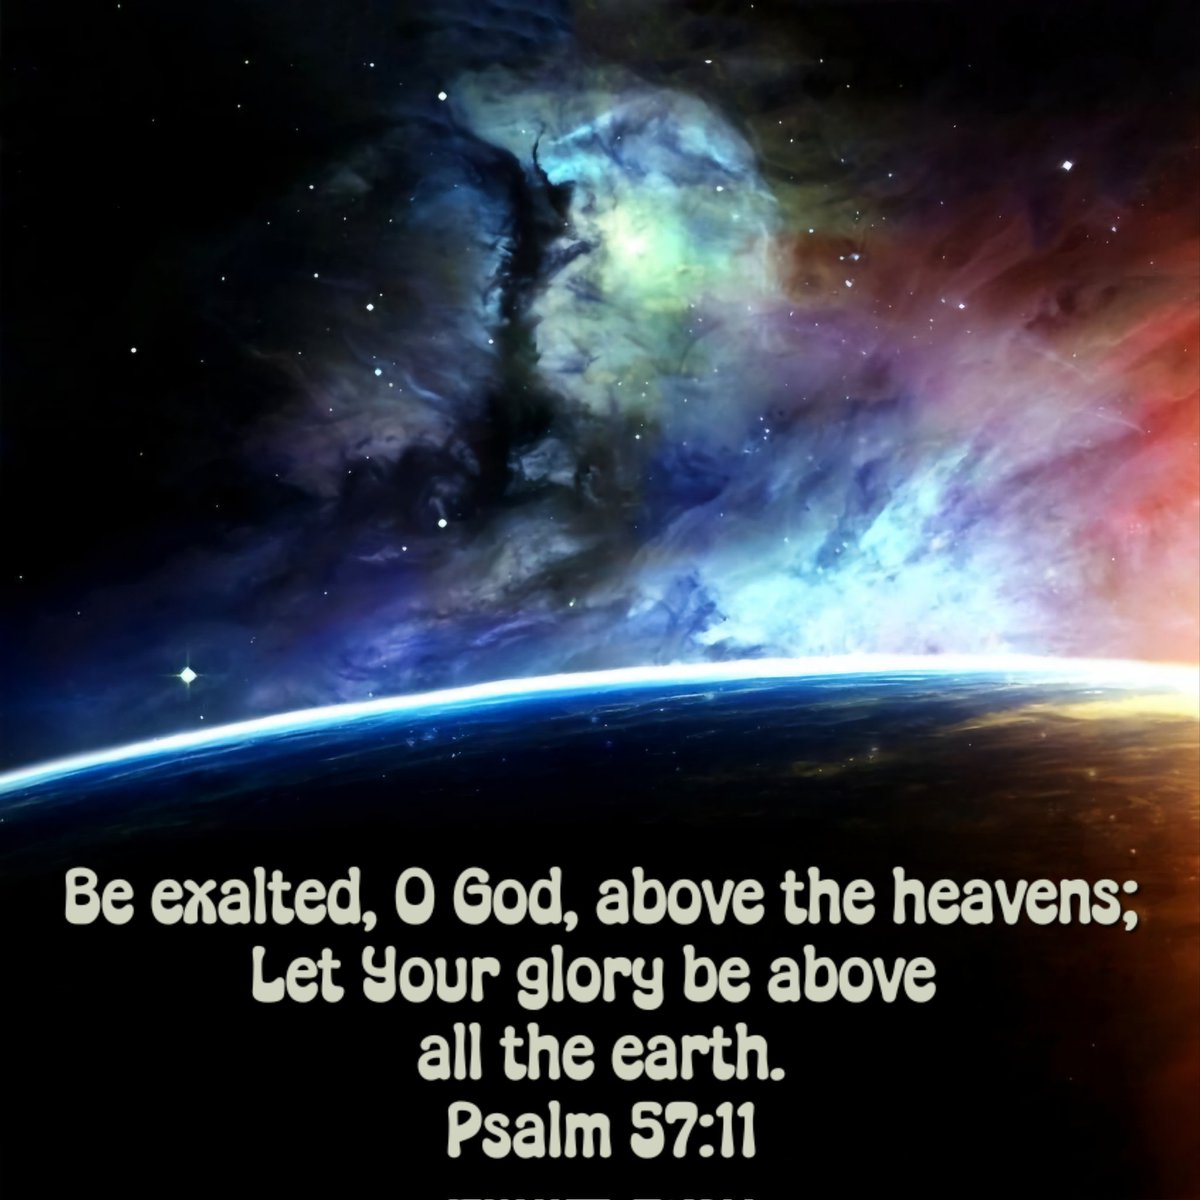 'Be exalted, O God, above the heavens; Let Your glory be above all the earth.' - Psalm 57:11 'Great is the Lord, and greatly to be praised; And His greatness is unsearchable.' Psalm- 145:3 'And blessed be His glorious name forever! And let the whole earth be filled with His…